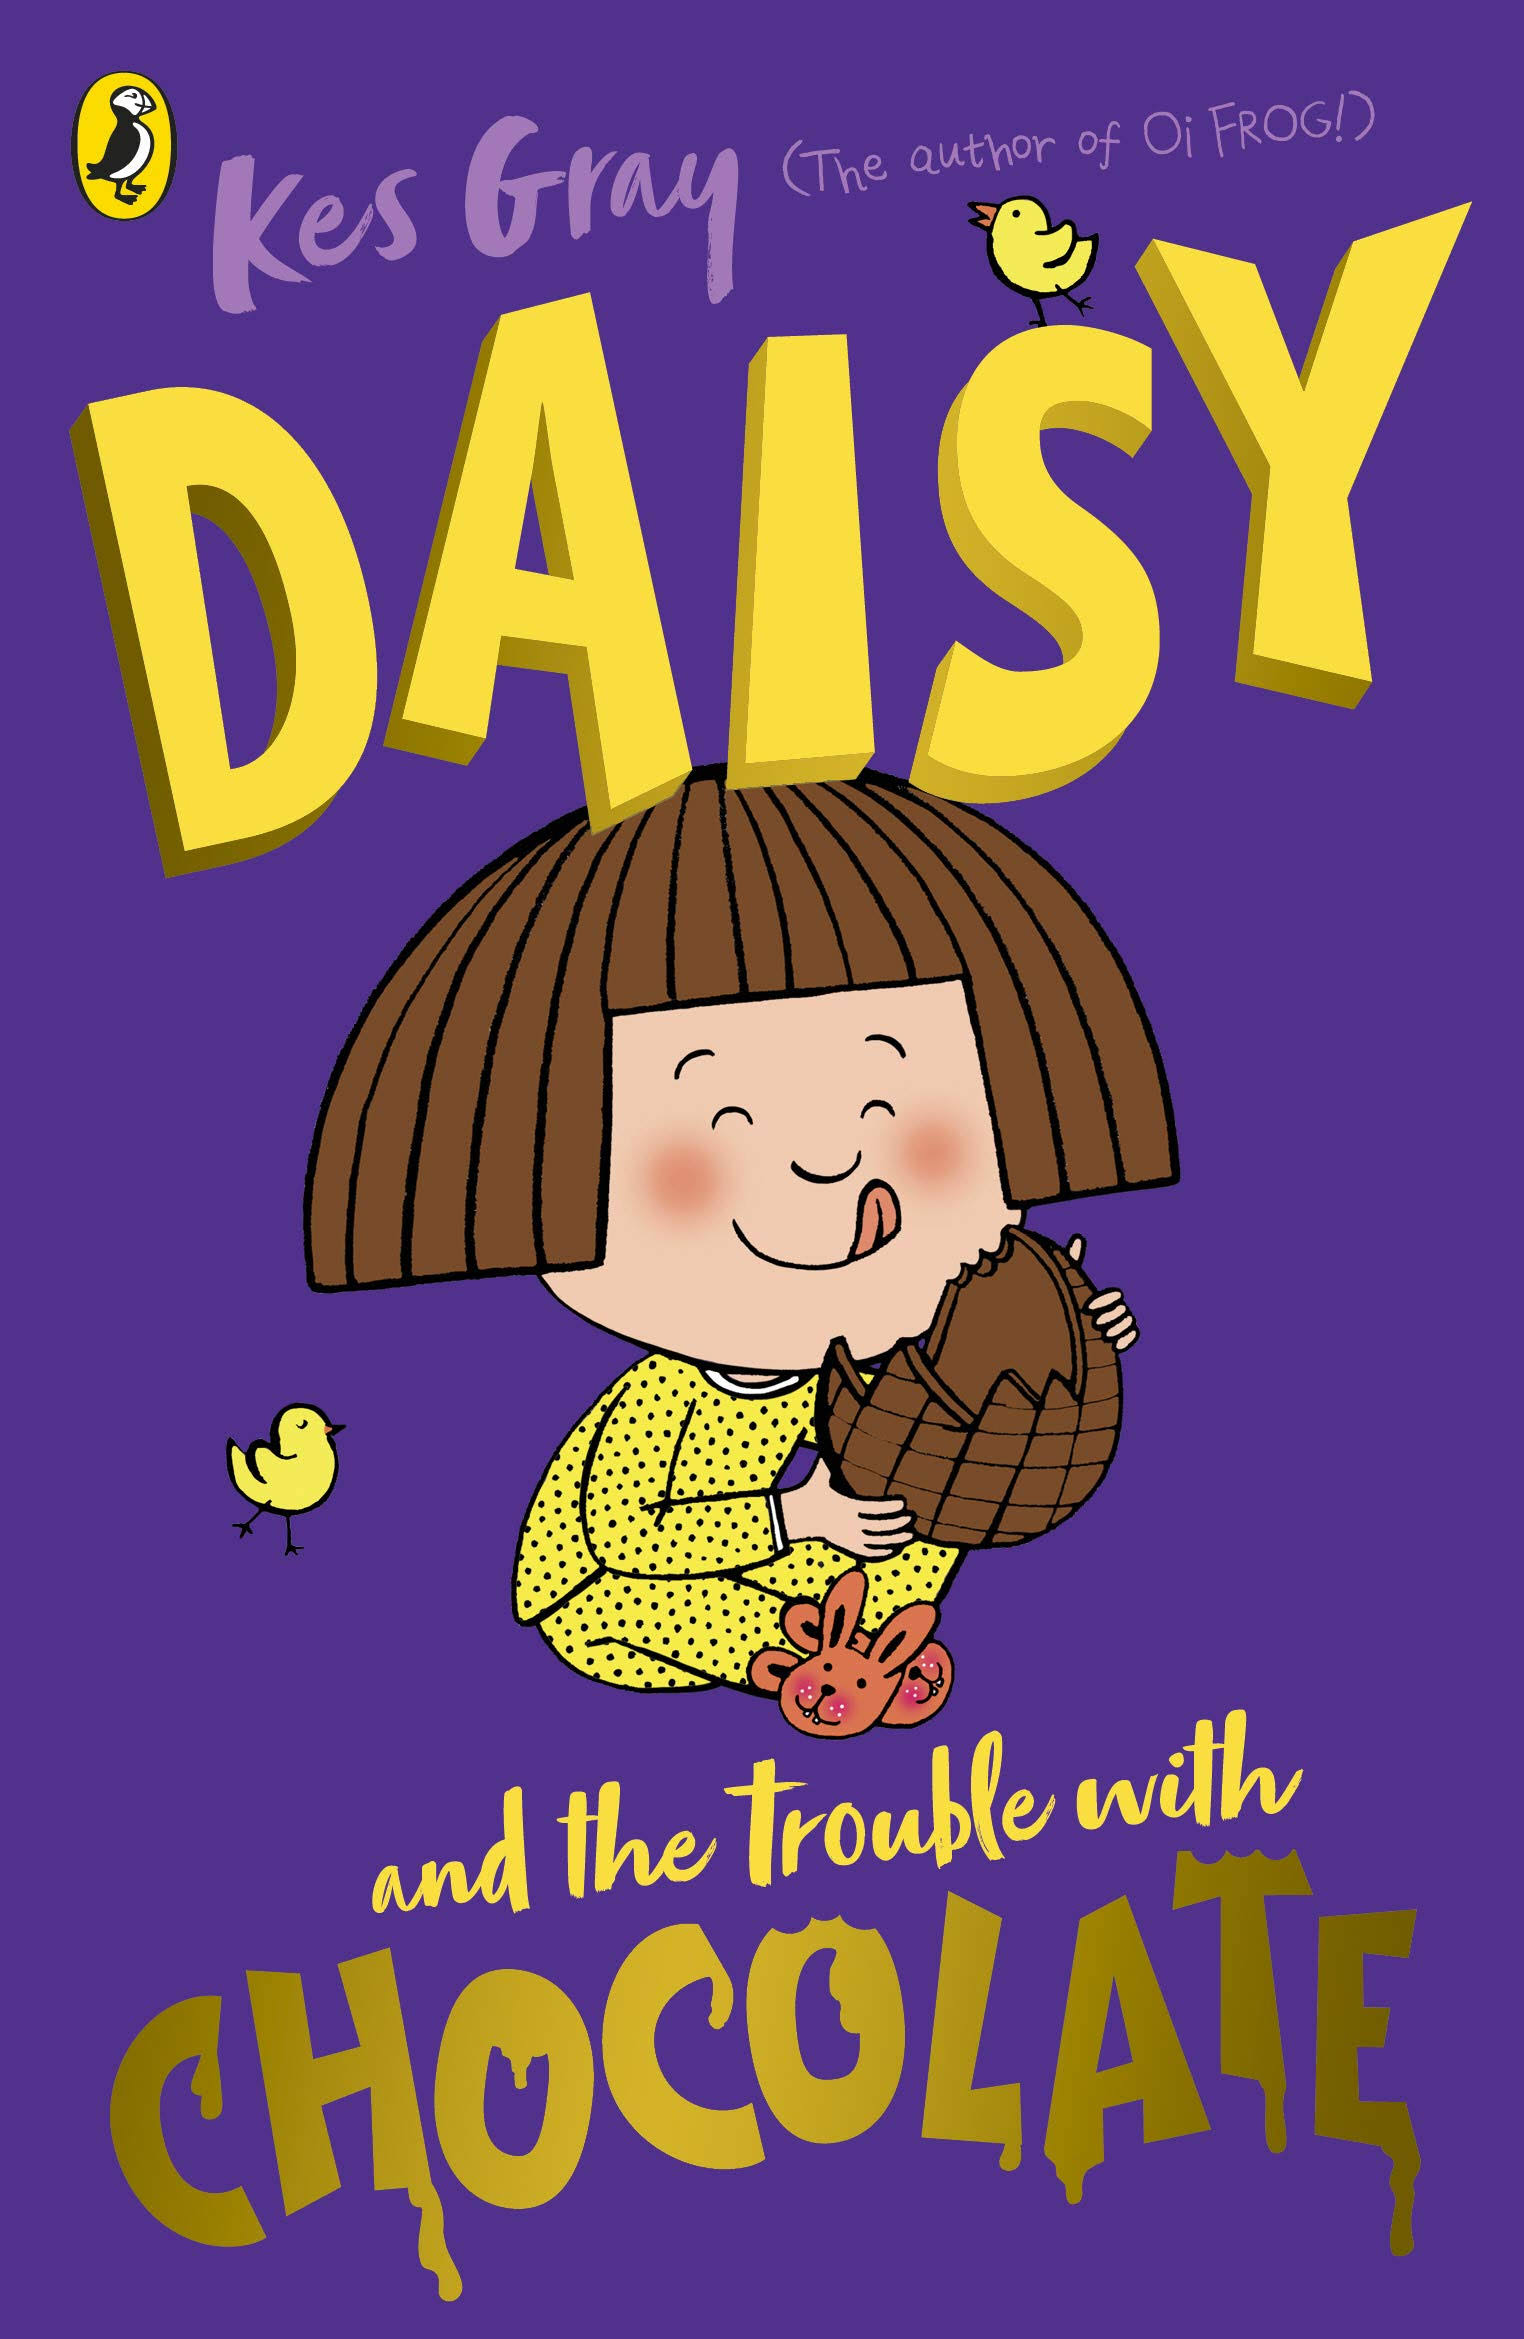 Daisy and the Trouble with Chocolate by Kes Gray